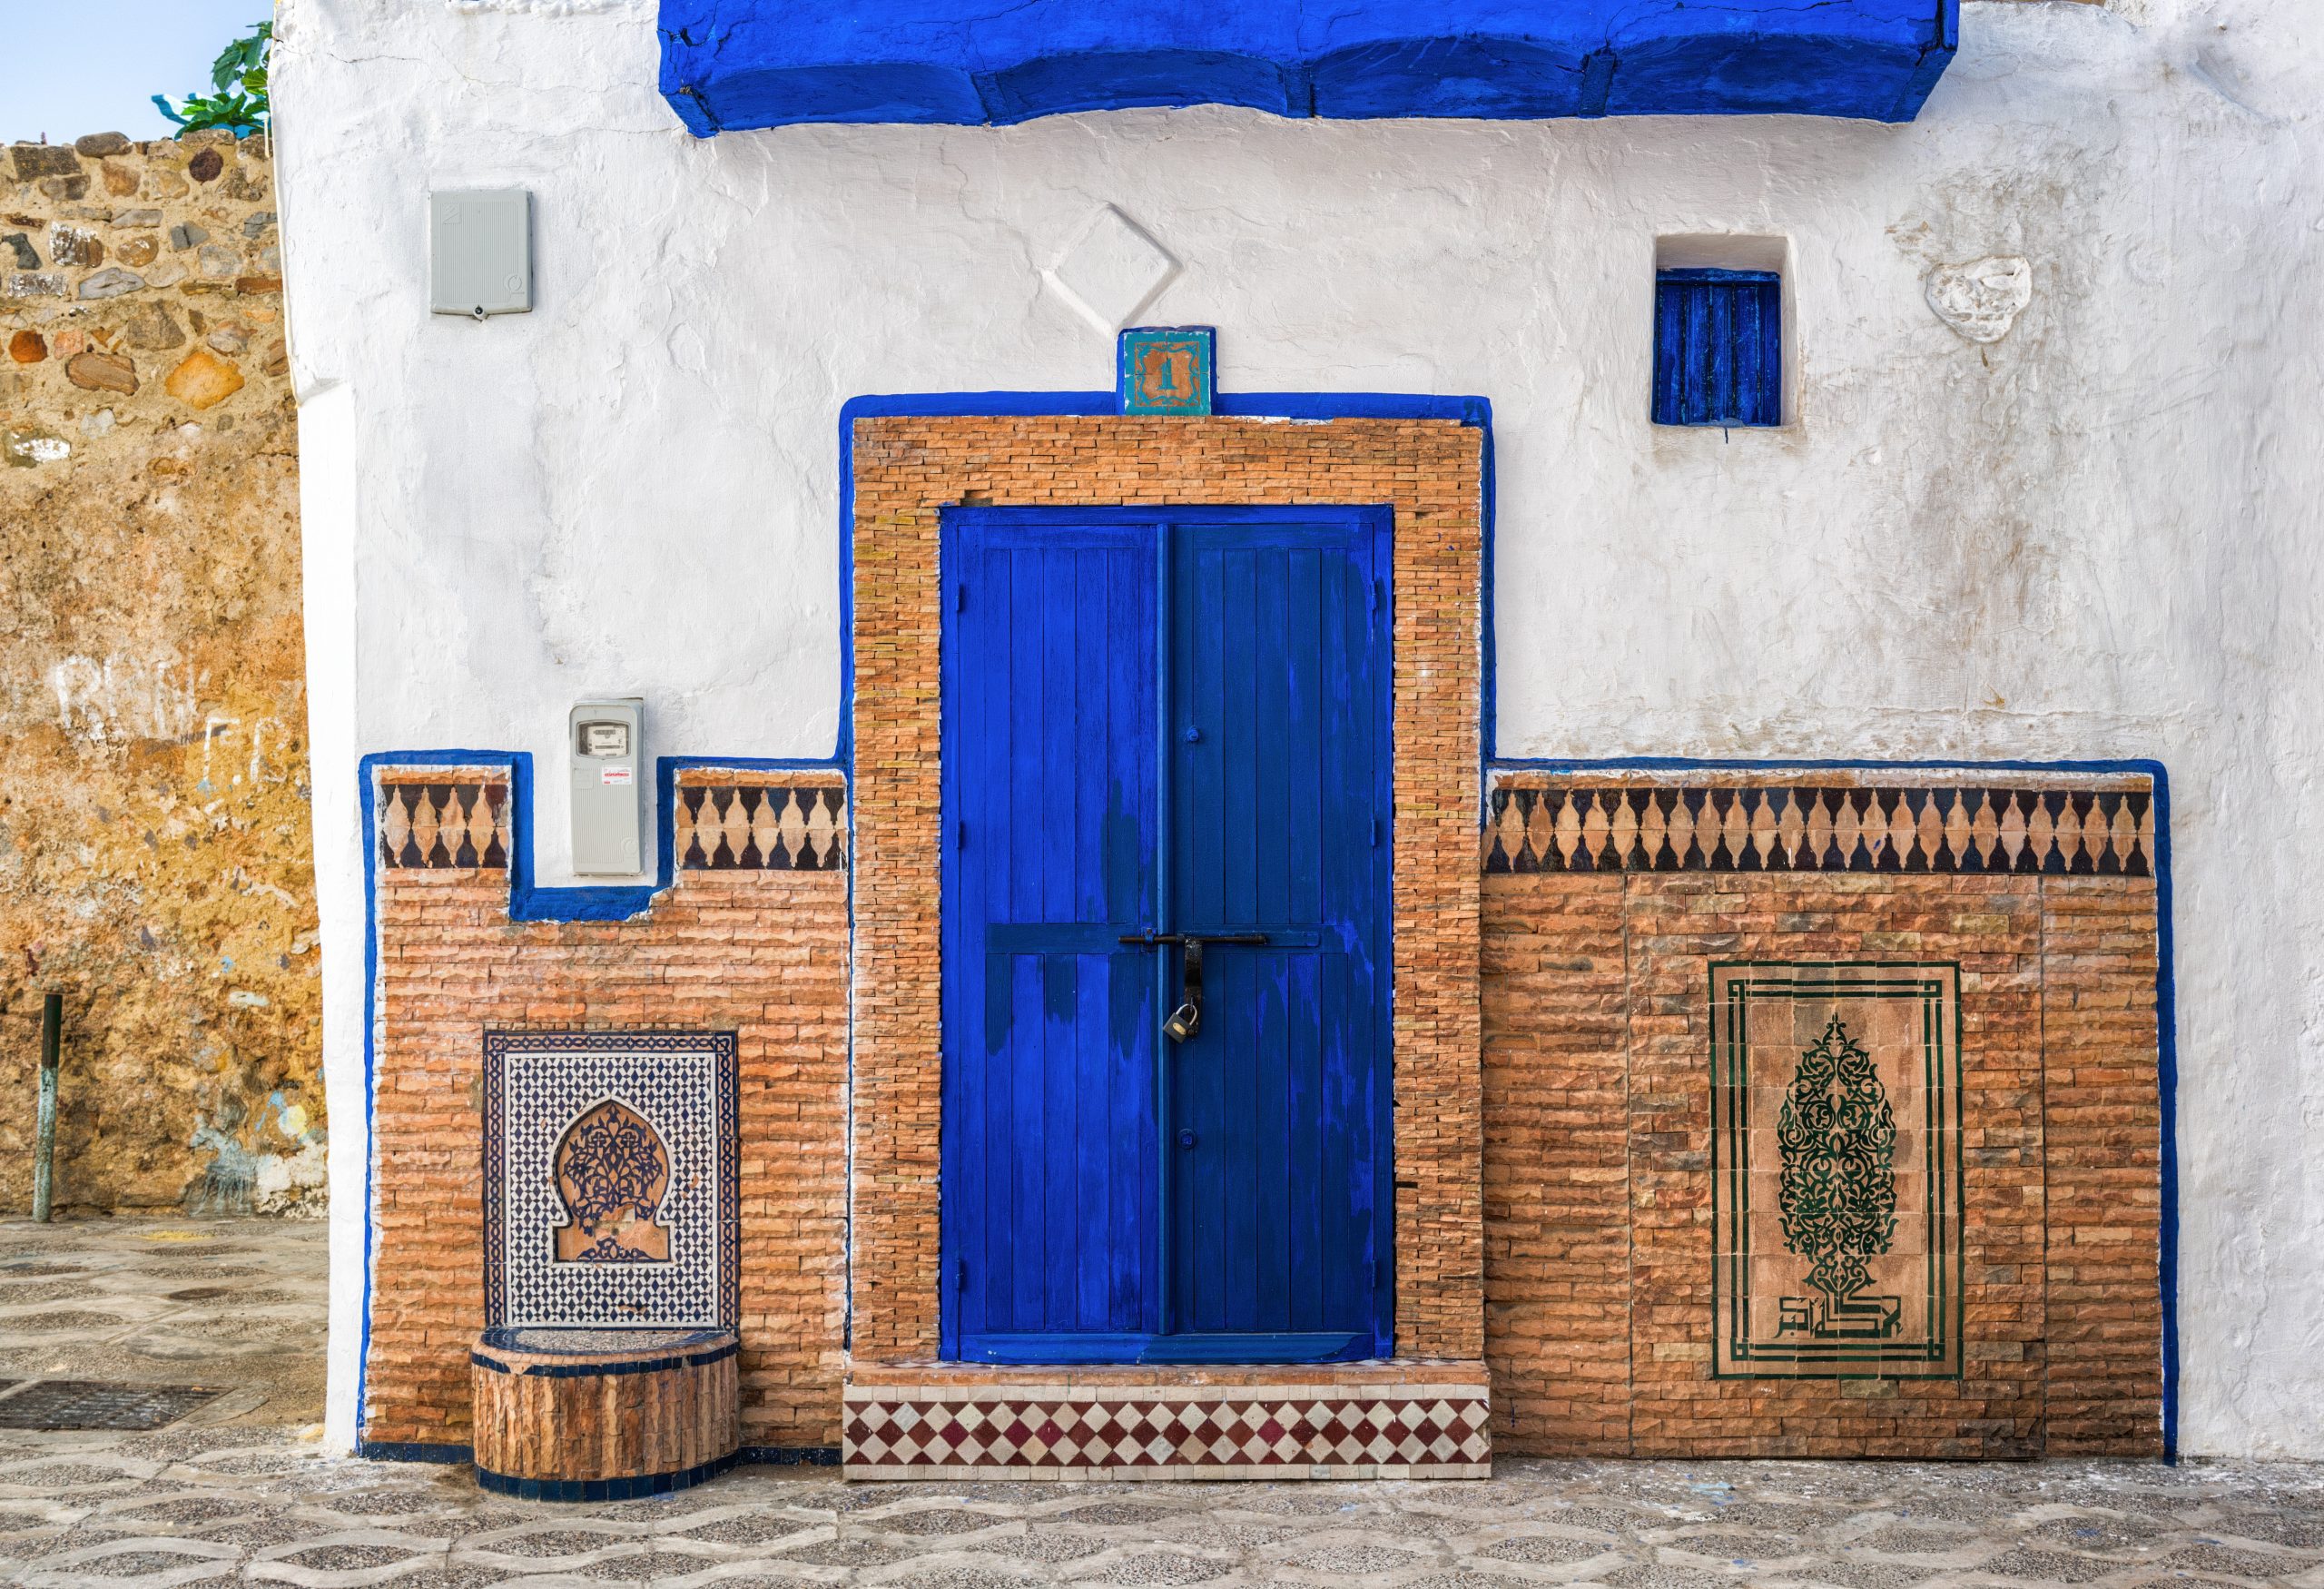 Is It Safe to Travel To Morocco?